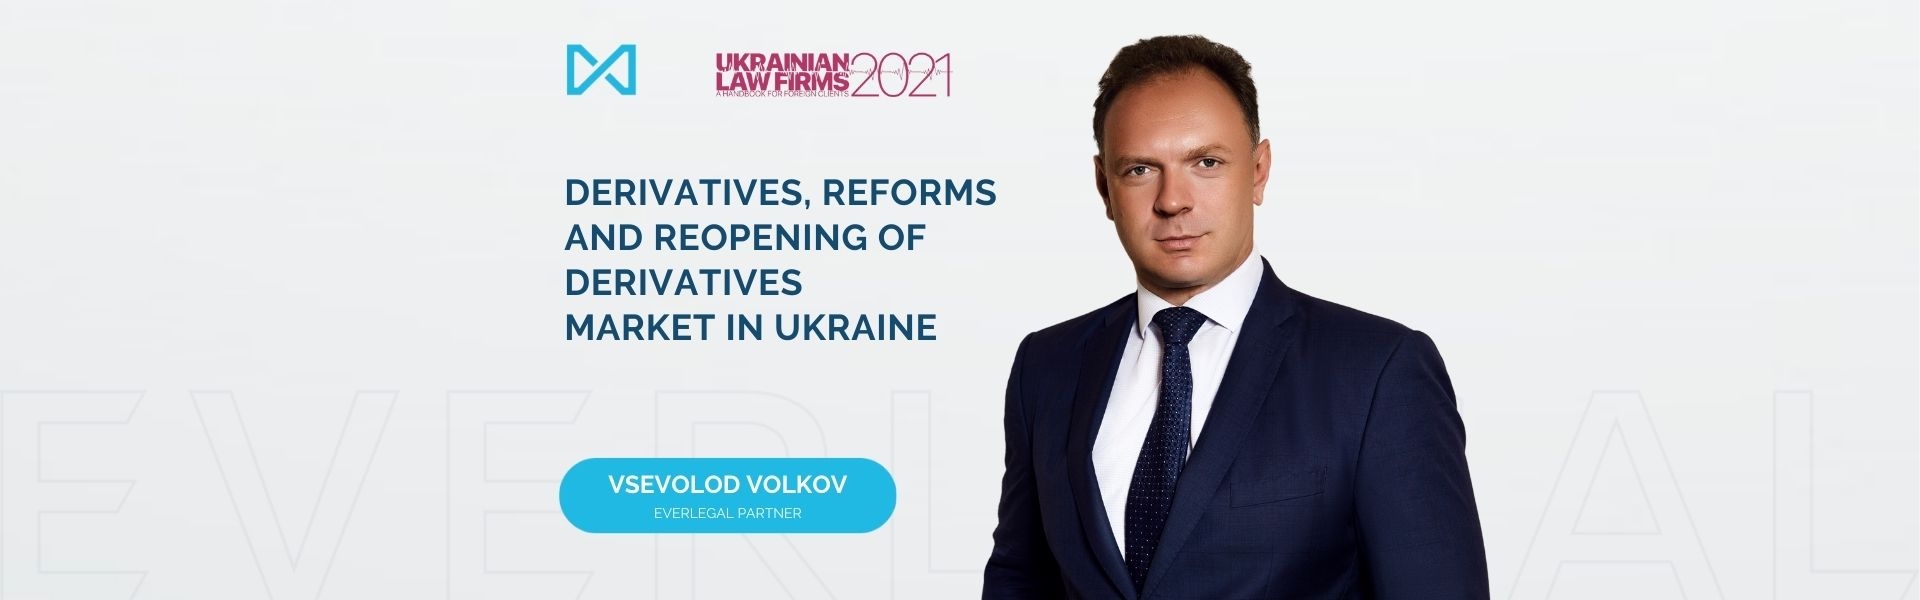 Derivatives, Reforms and Reopening of Derivatives Market in Ukraine